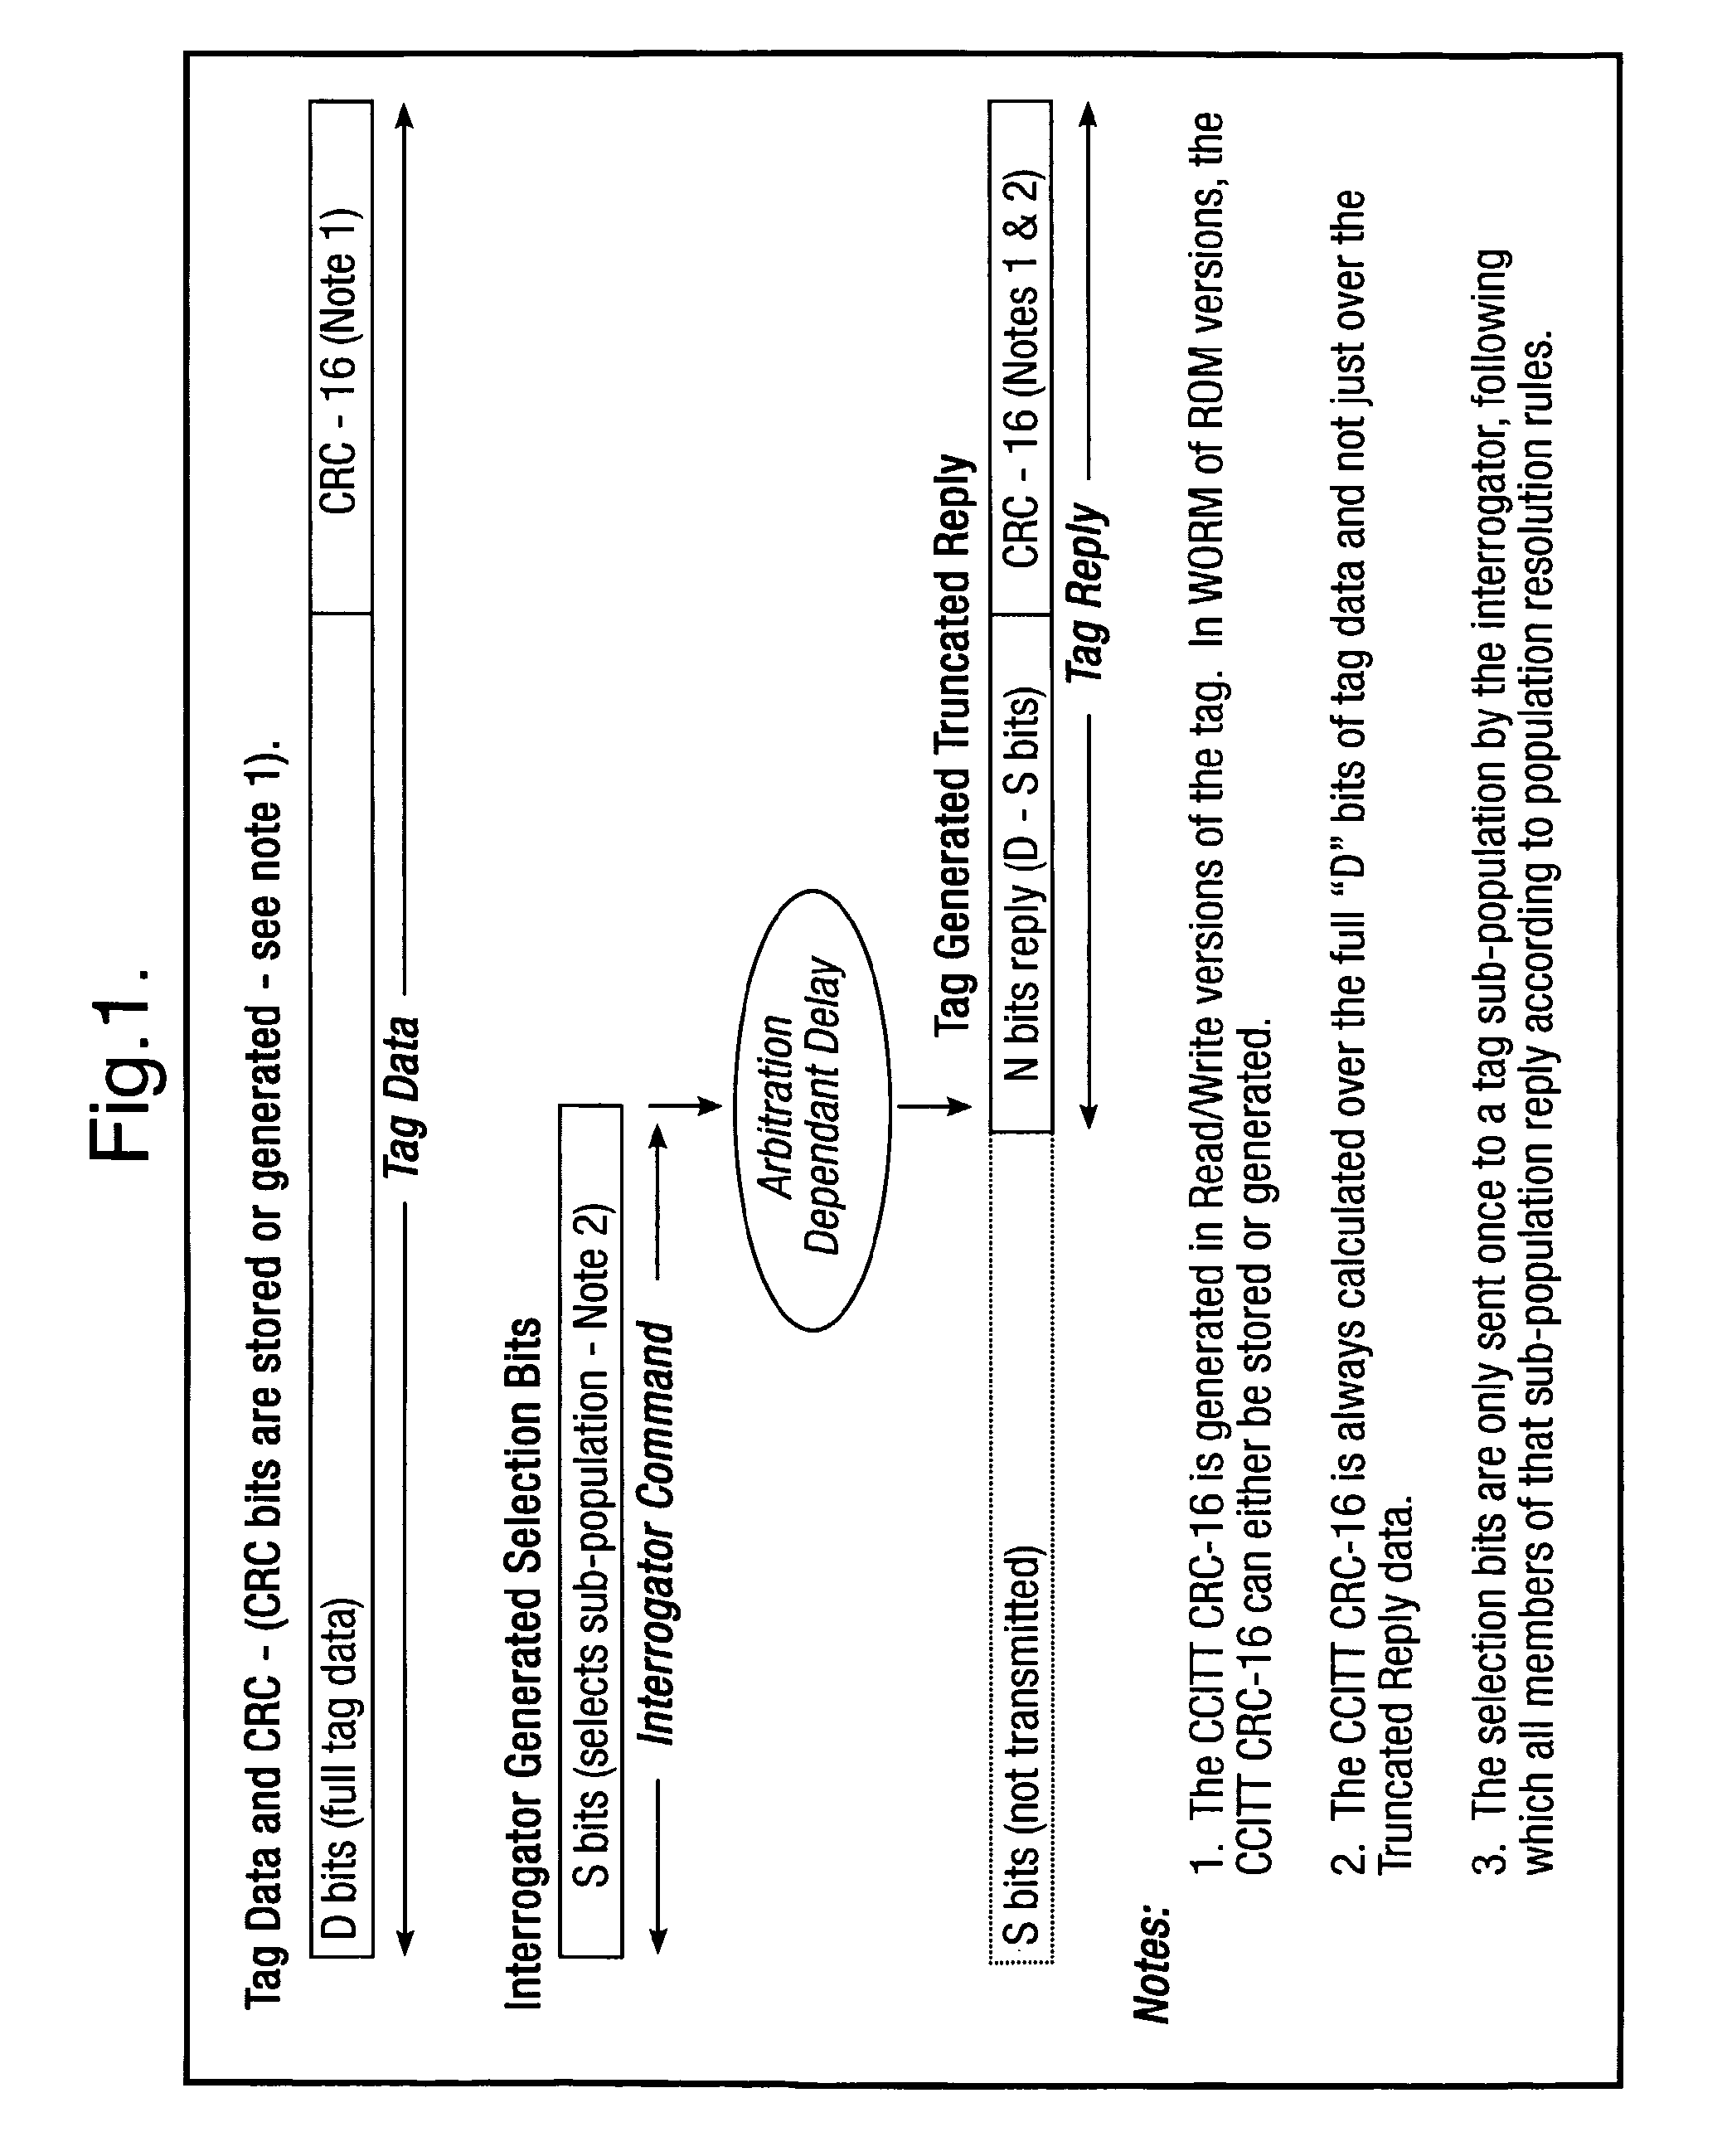 Method and system for calculating and verifying the integrity of data in a data transmission system